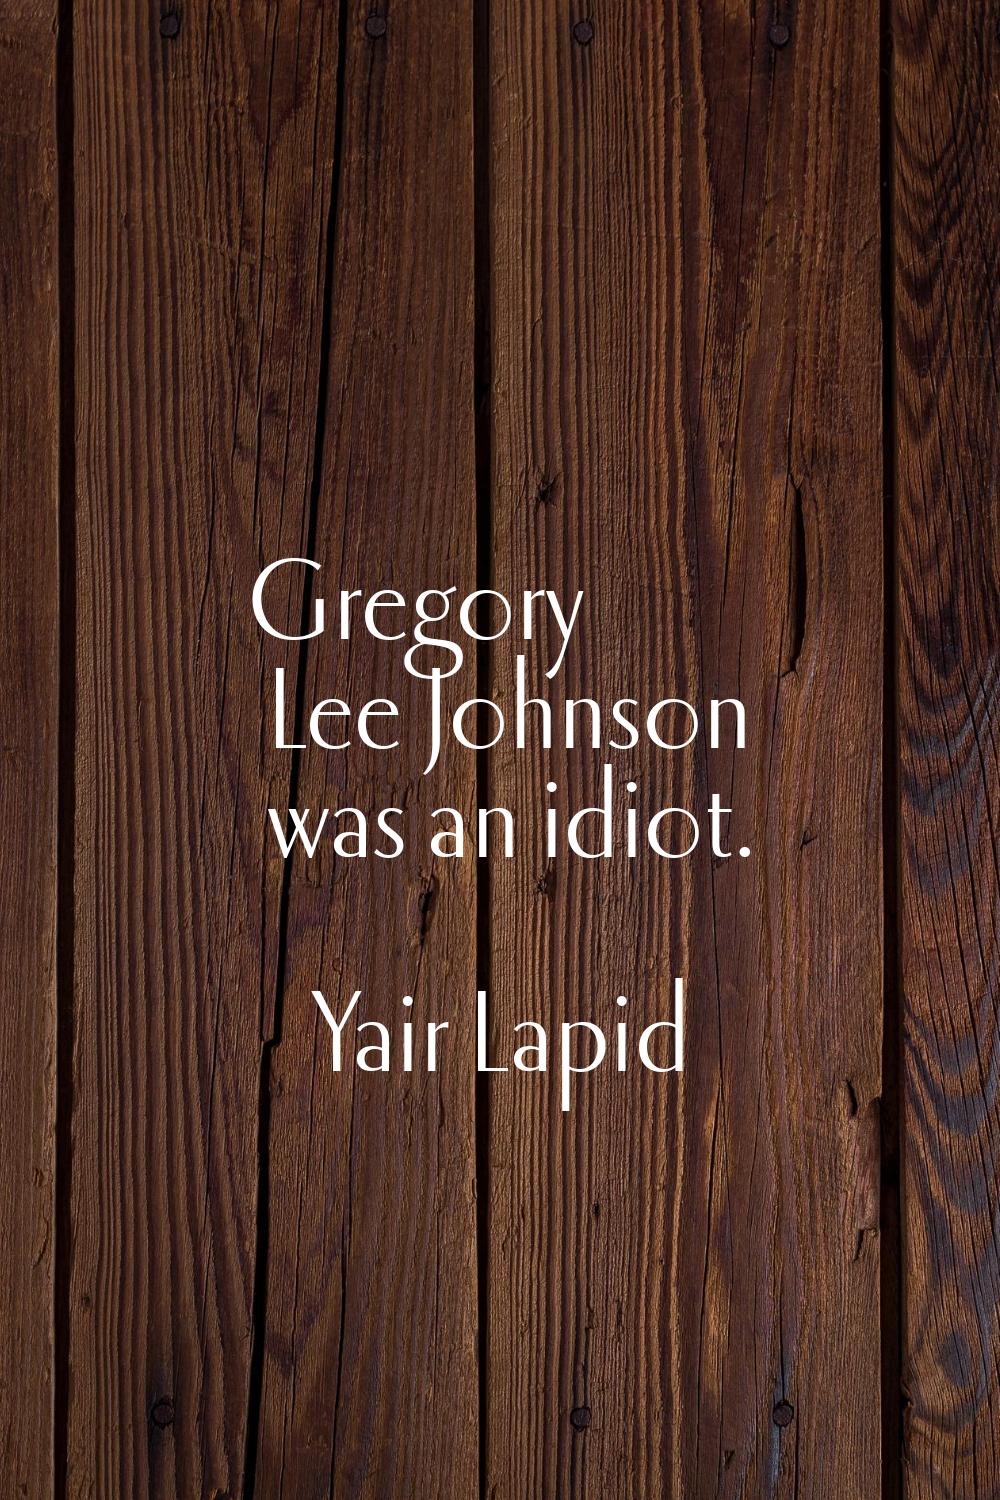 Gregory Lee Johnson was an idiot.